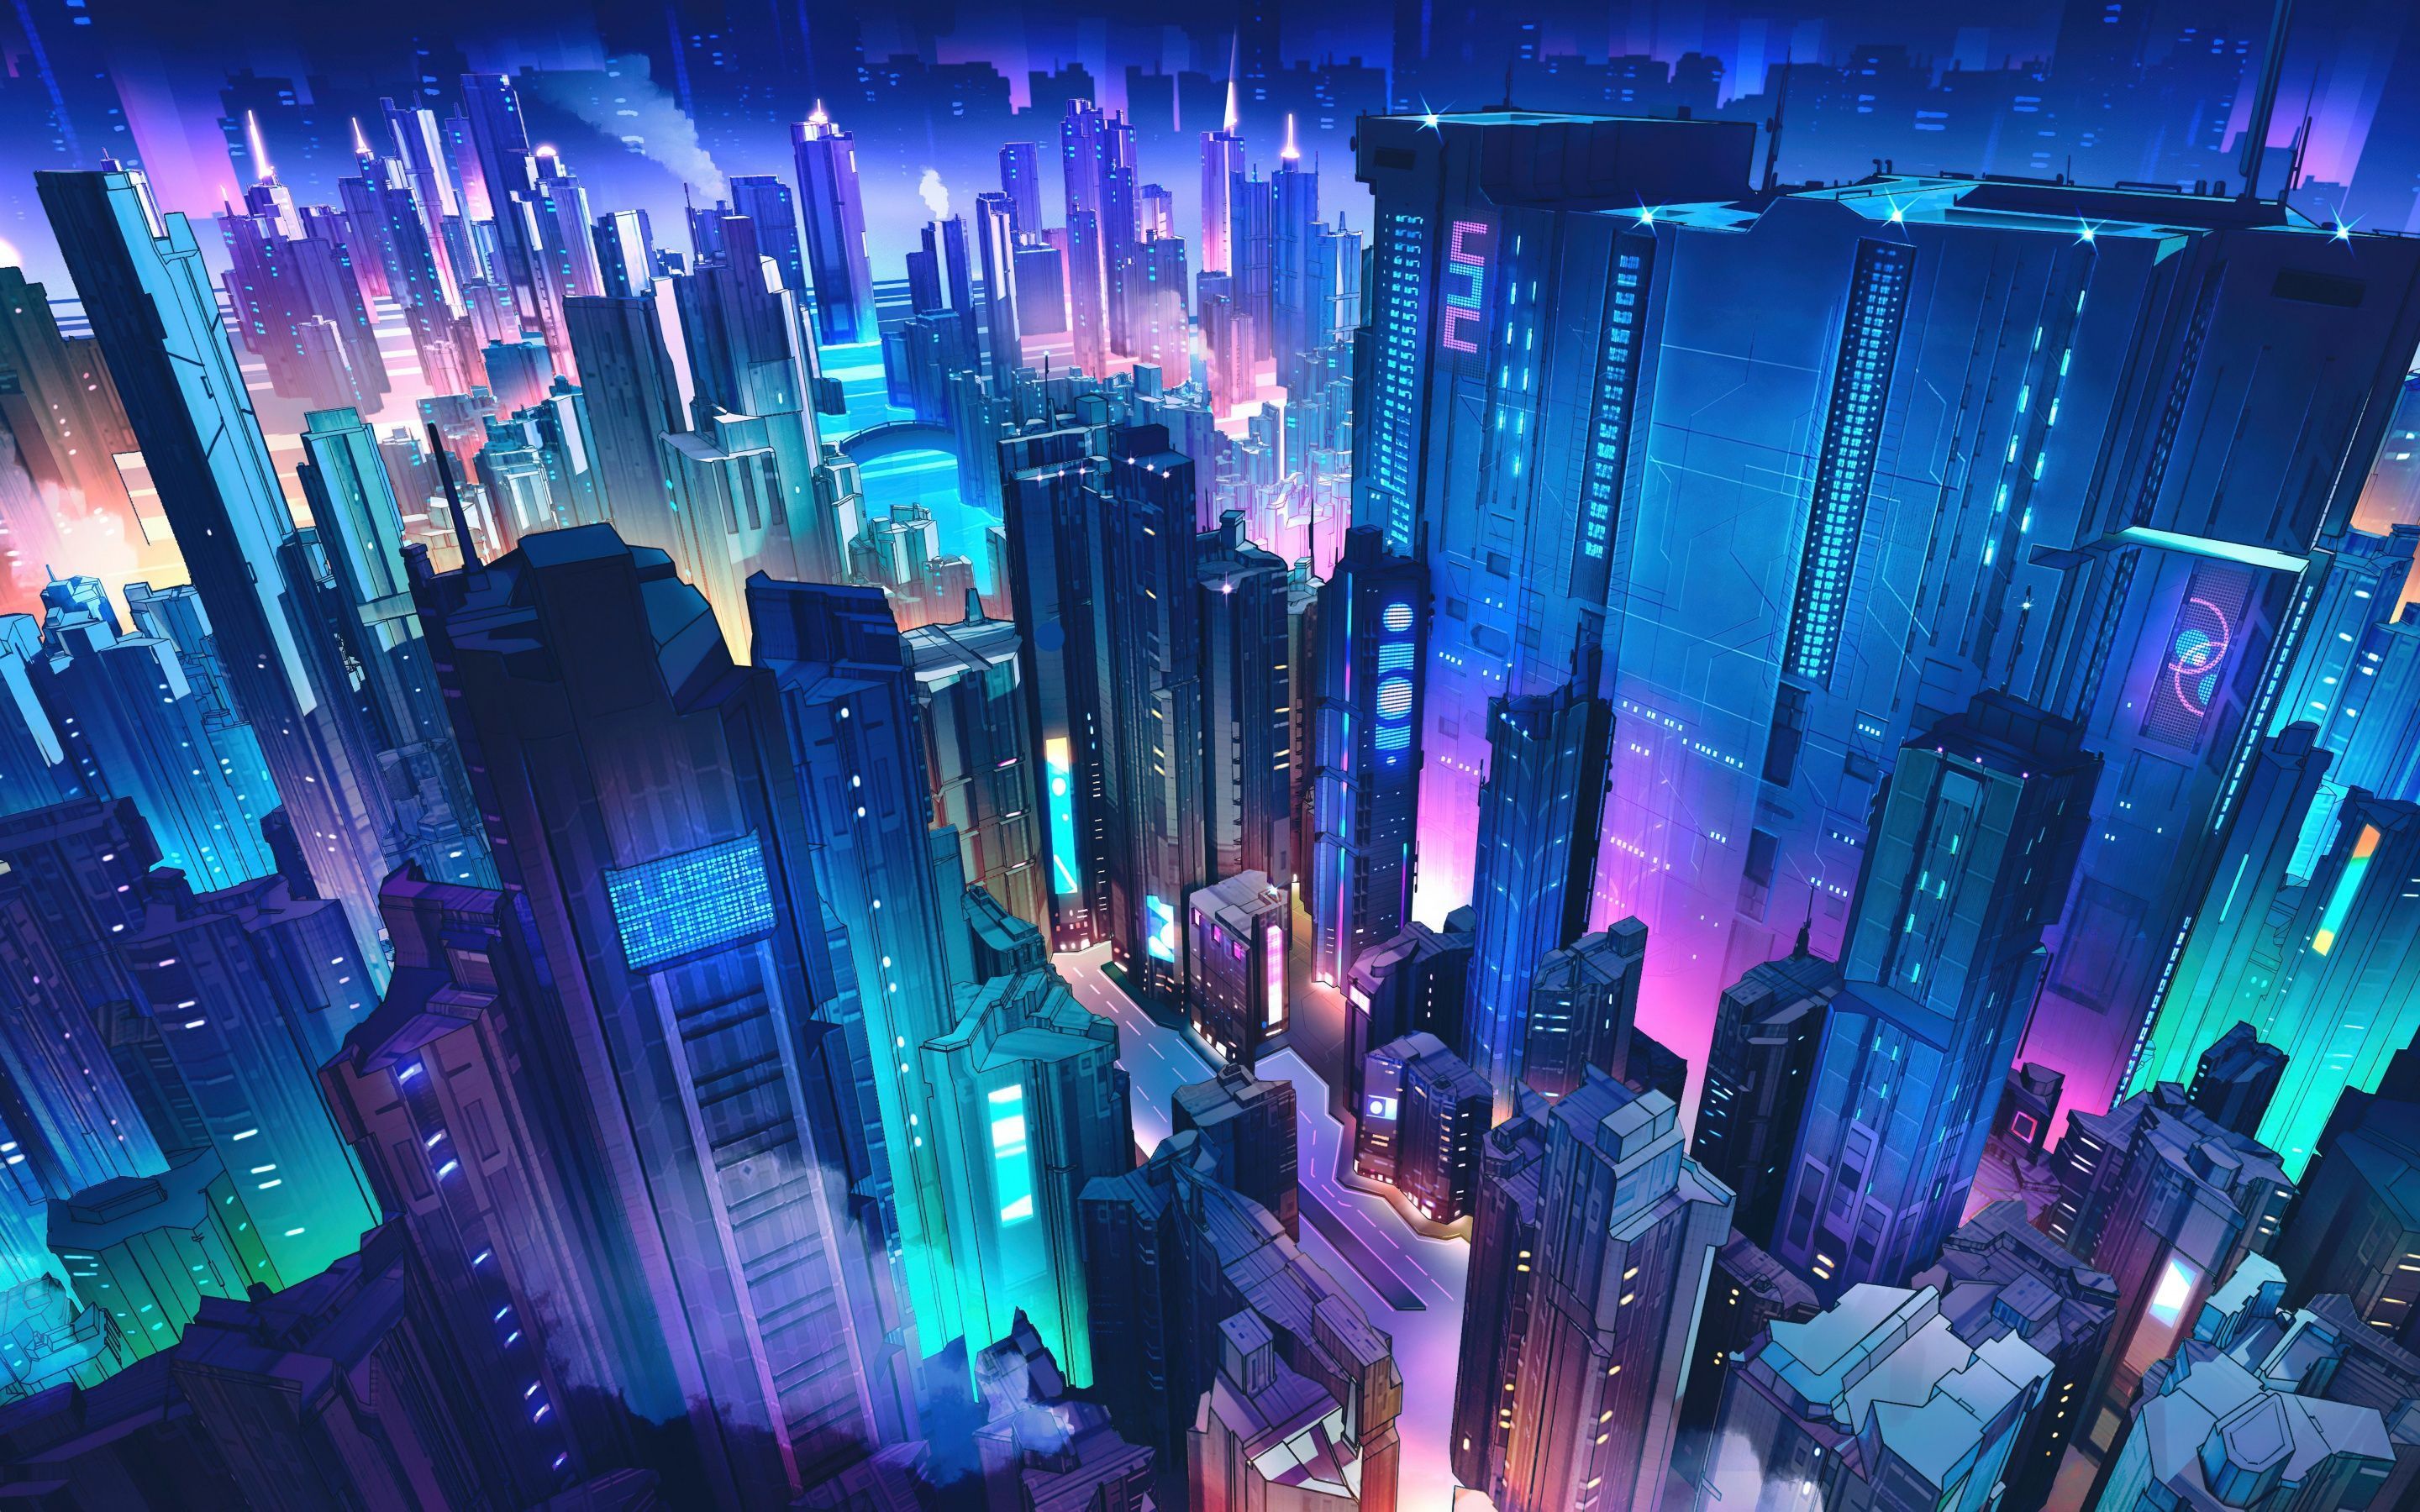 A cyberpunk city at night, with skyscrapers lit up in blue and purple. - Cyberpunk